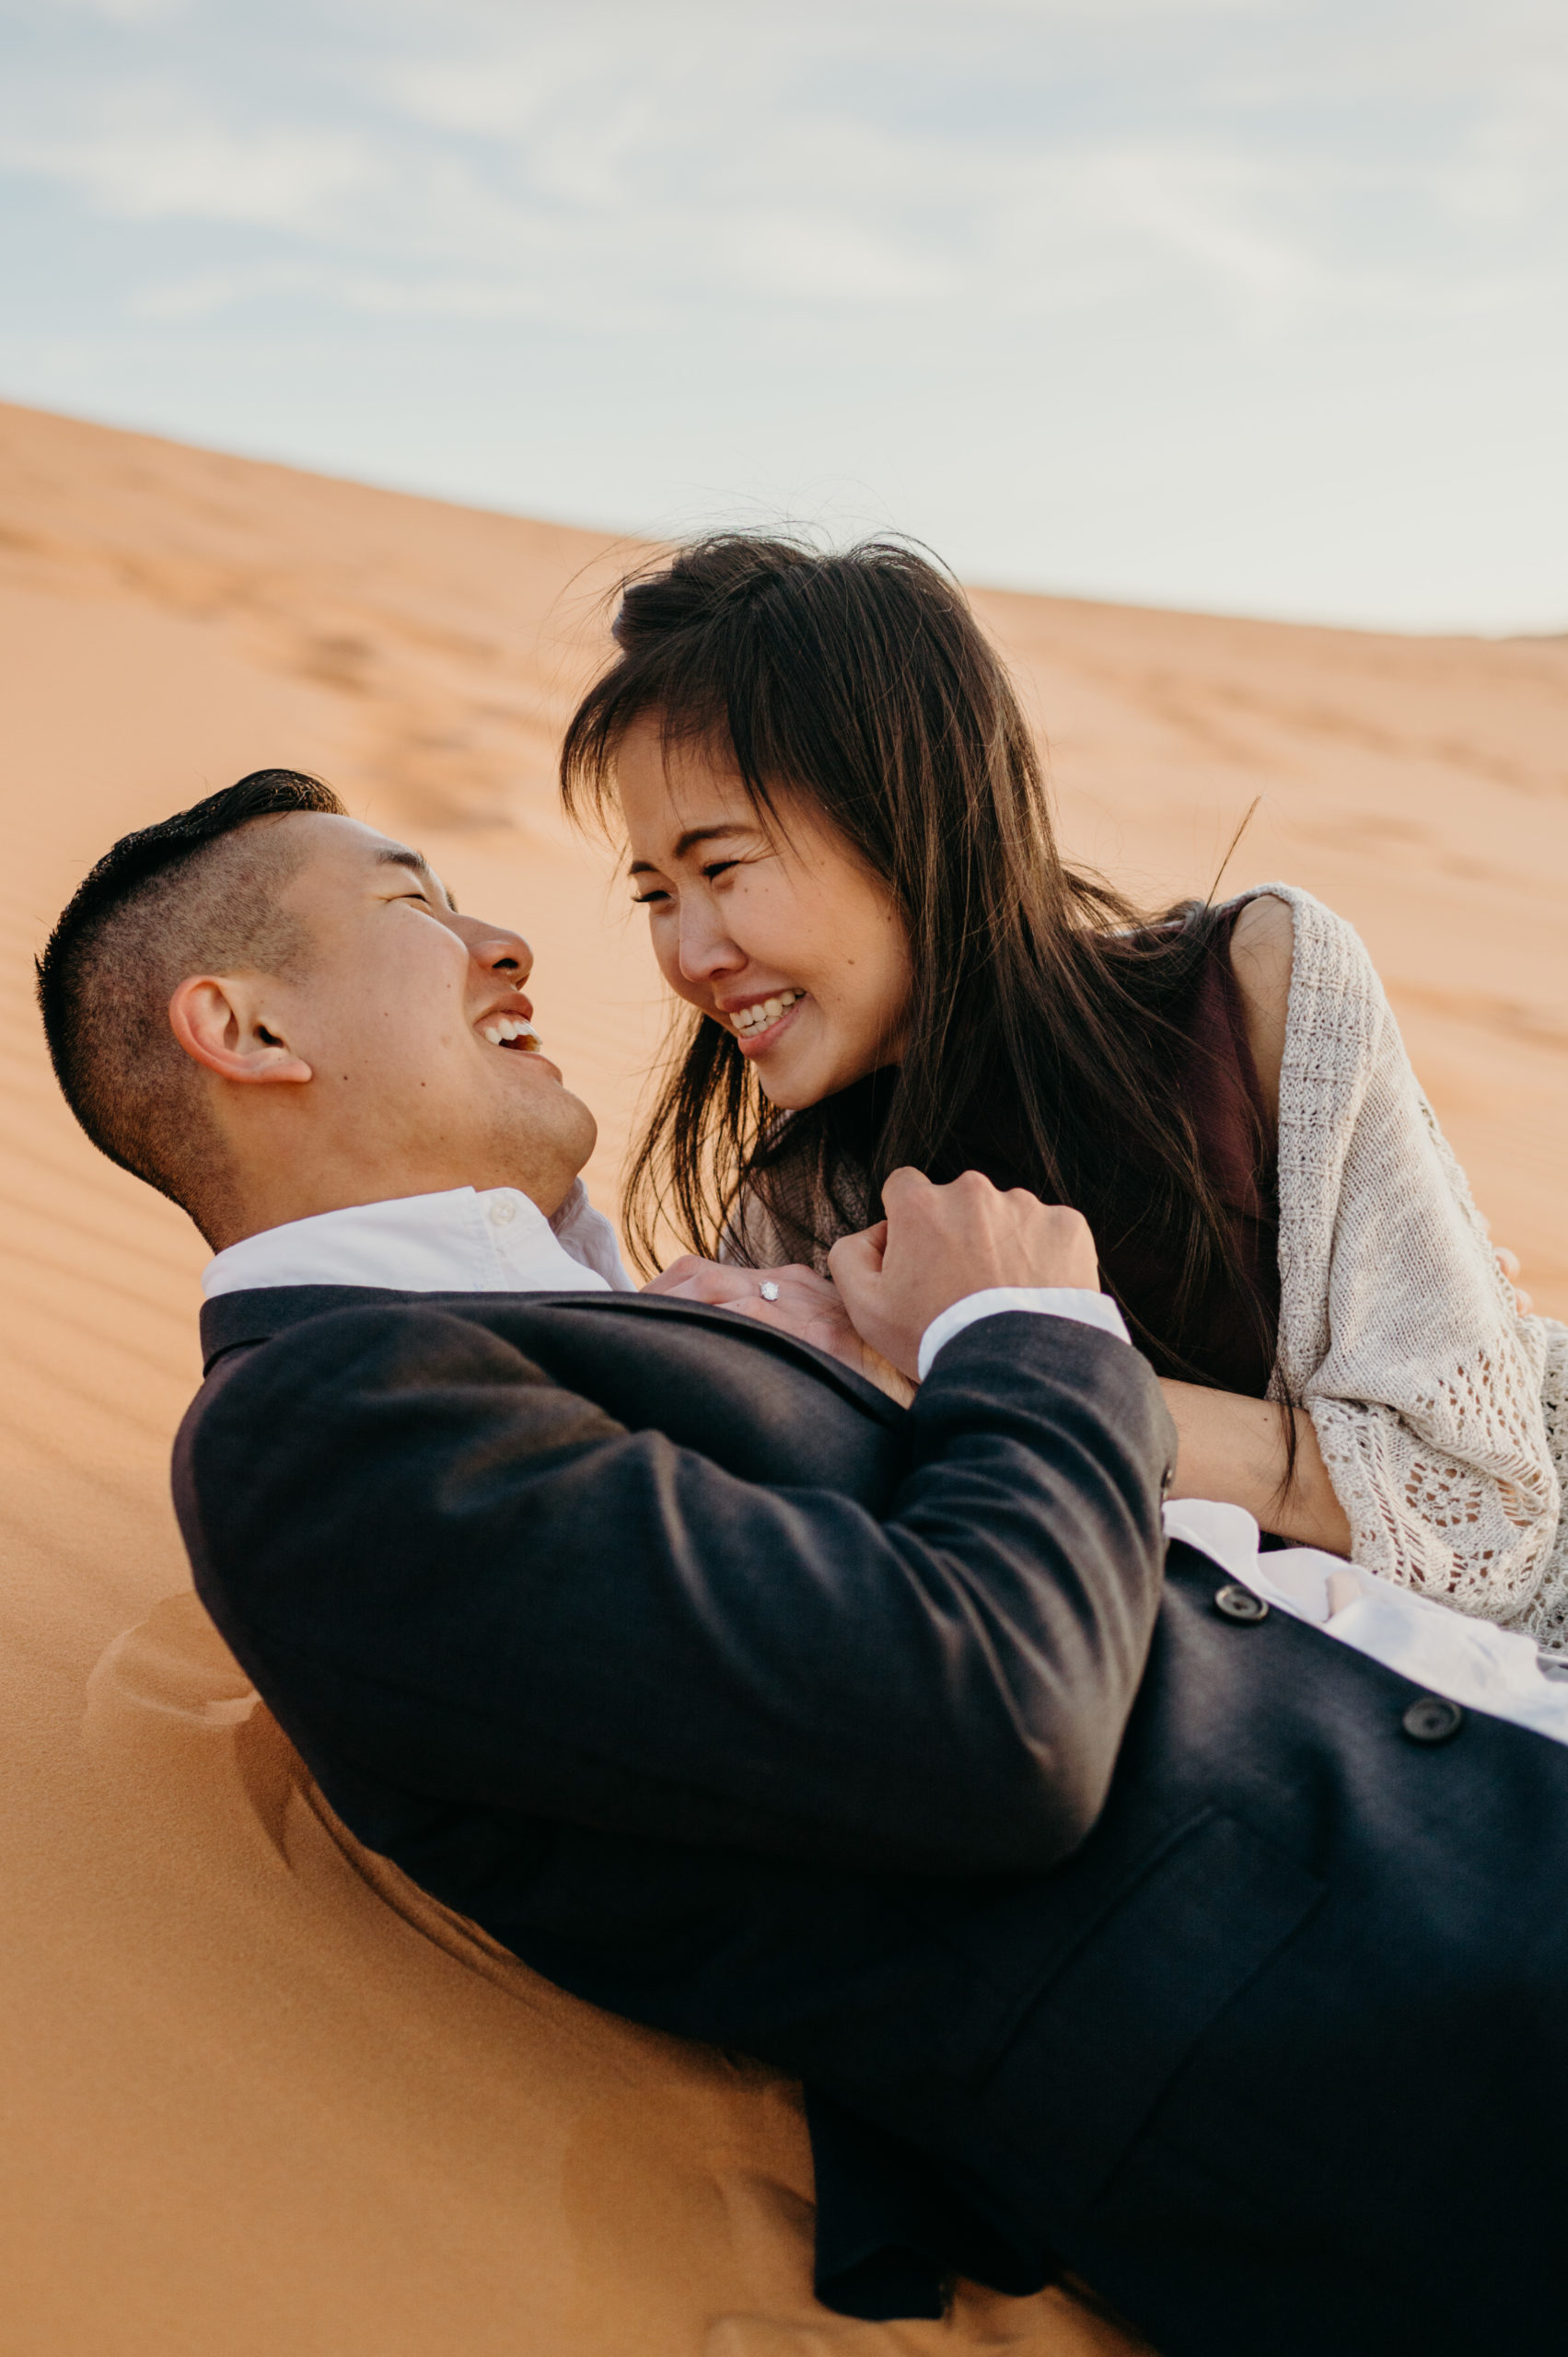 A joyful photo of a couple lying on the sand in a desert, smiling and holding hands, with the man wearing a suit and the woman in a light cardigan.